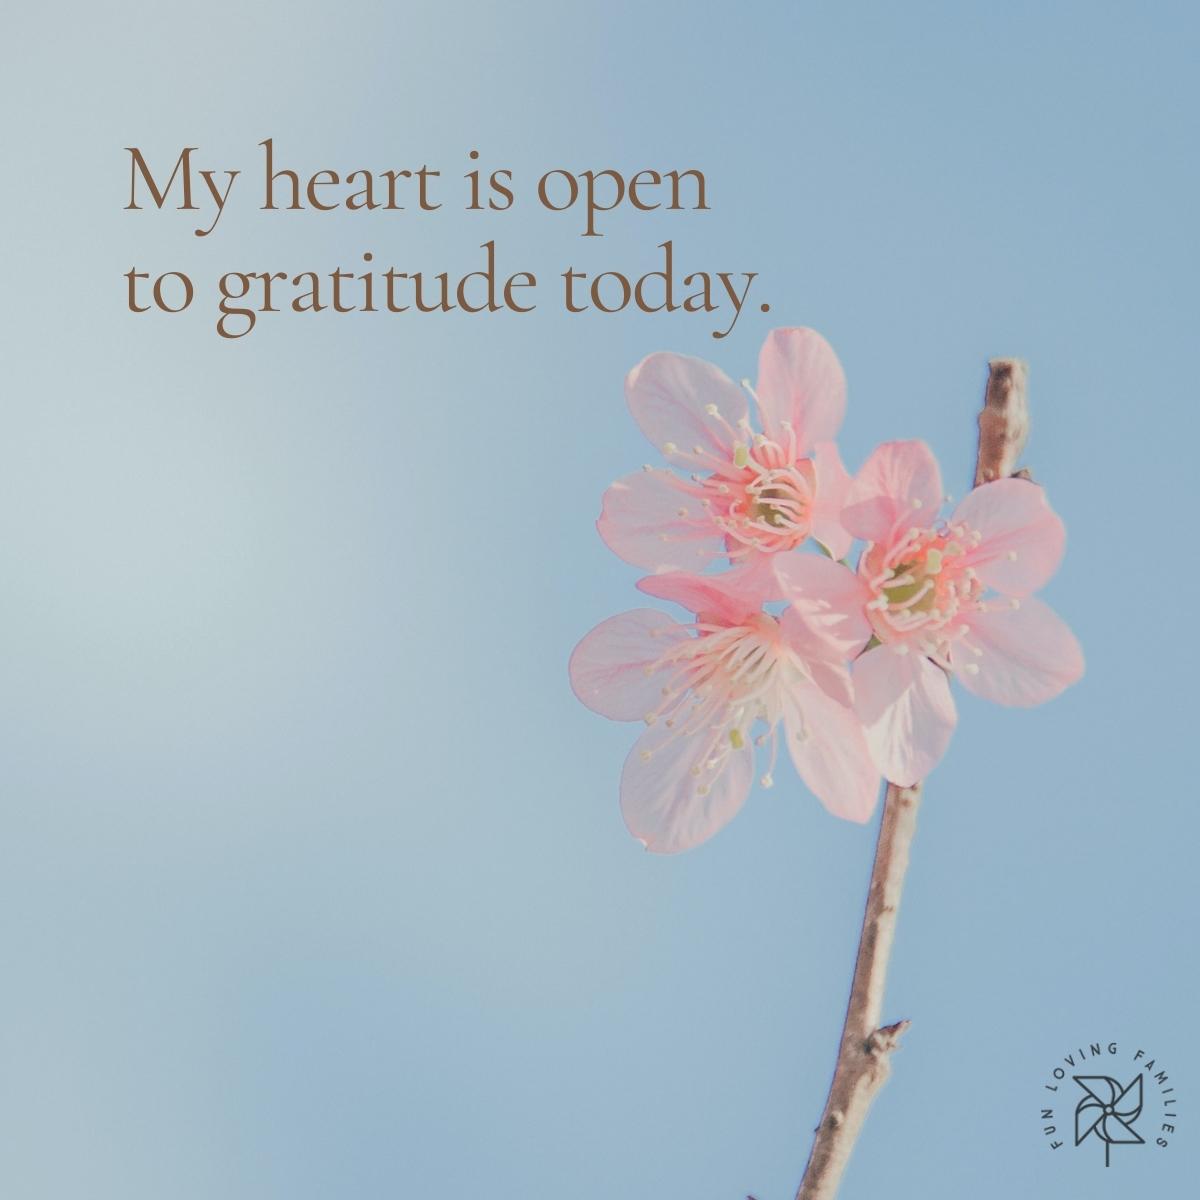 My heart is open to gratitude today affirmation